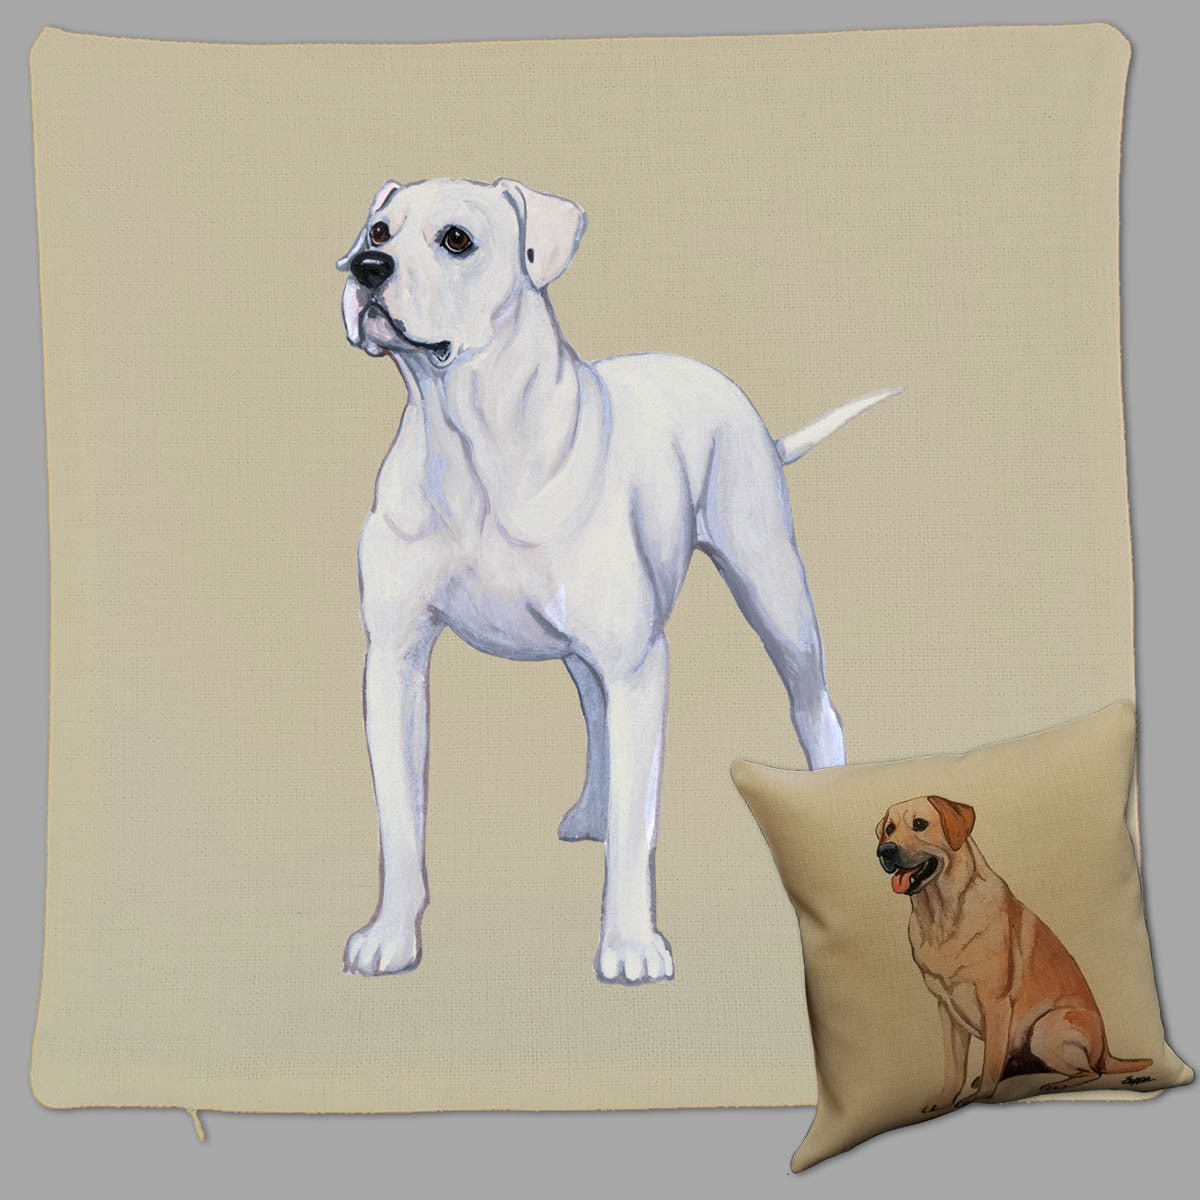 18 All Hands on Deck Puppies Decorative Square Throw Pillows, Set